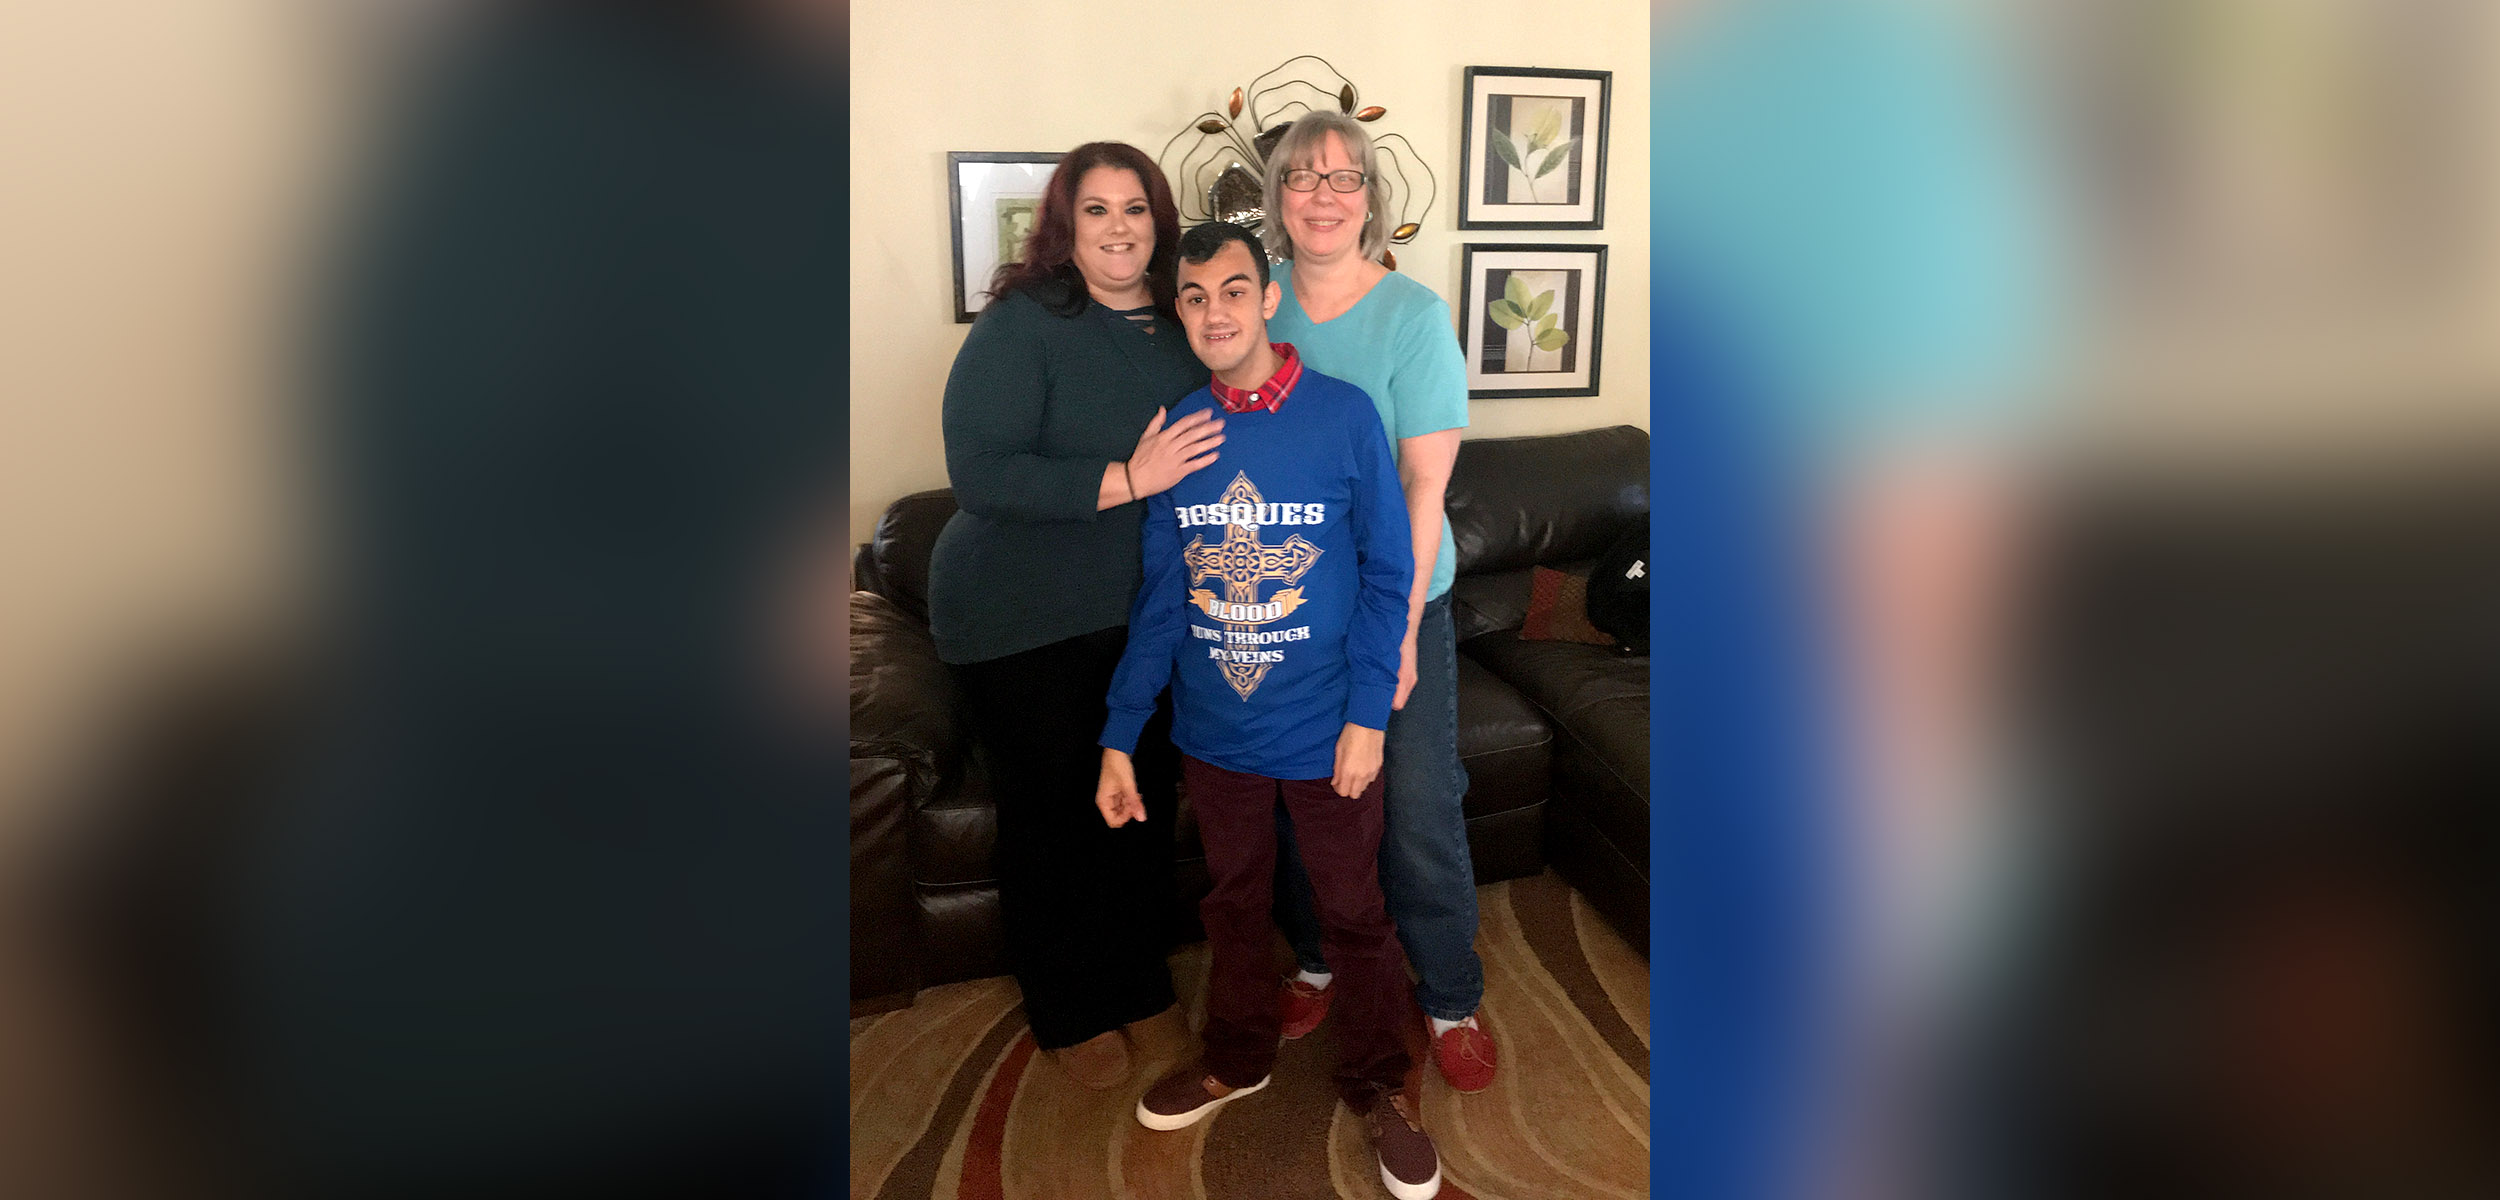 PHOTO: Tracey and Anthony Dones with the woman who saved Anthony Dones' life, Patti Bosques.